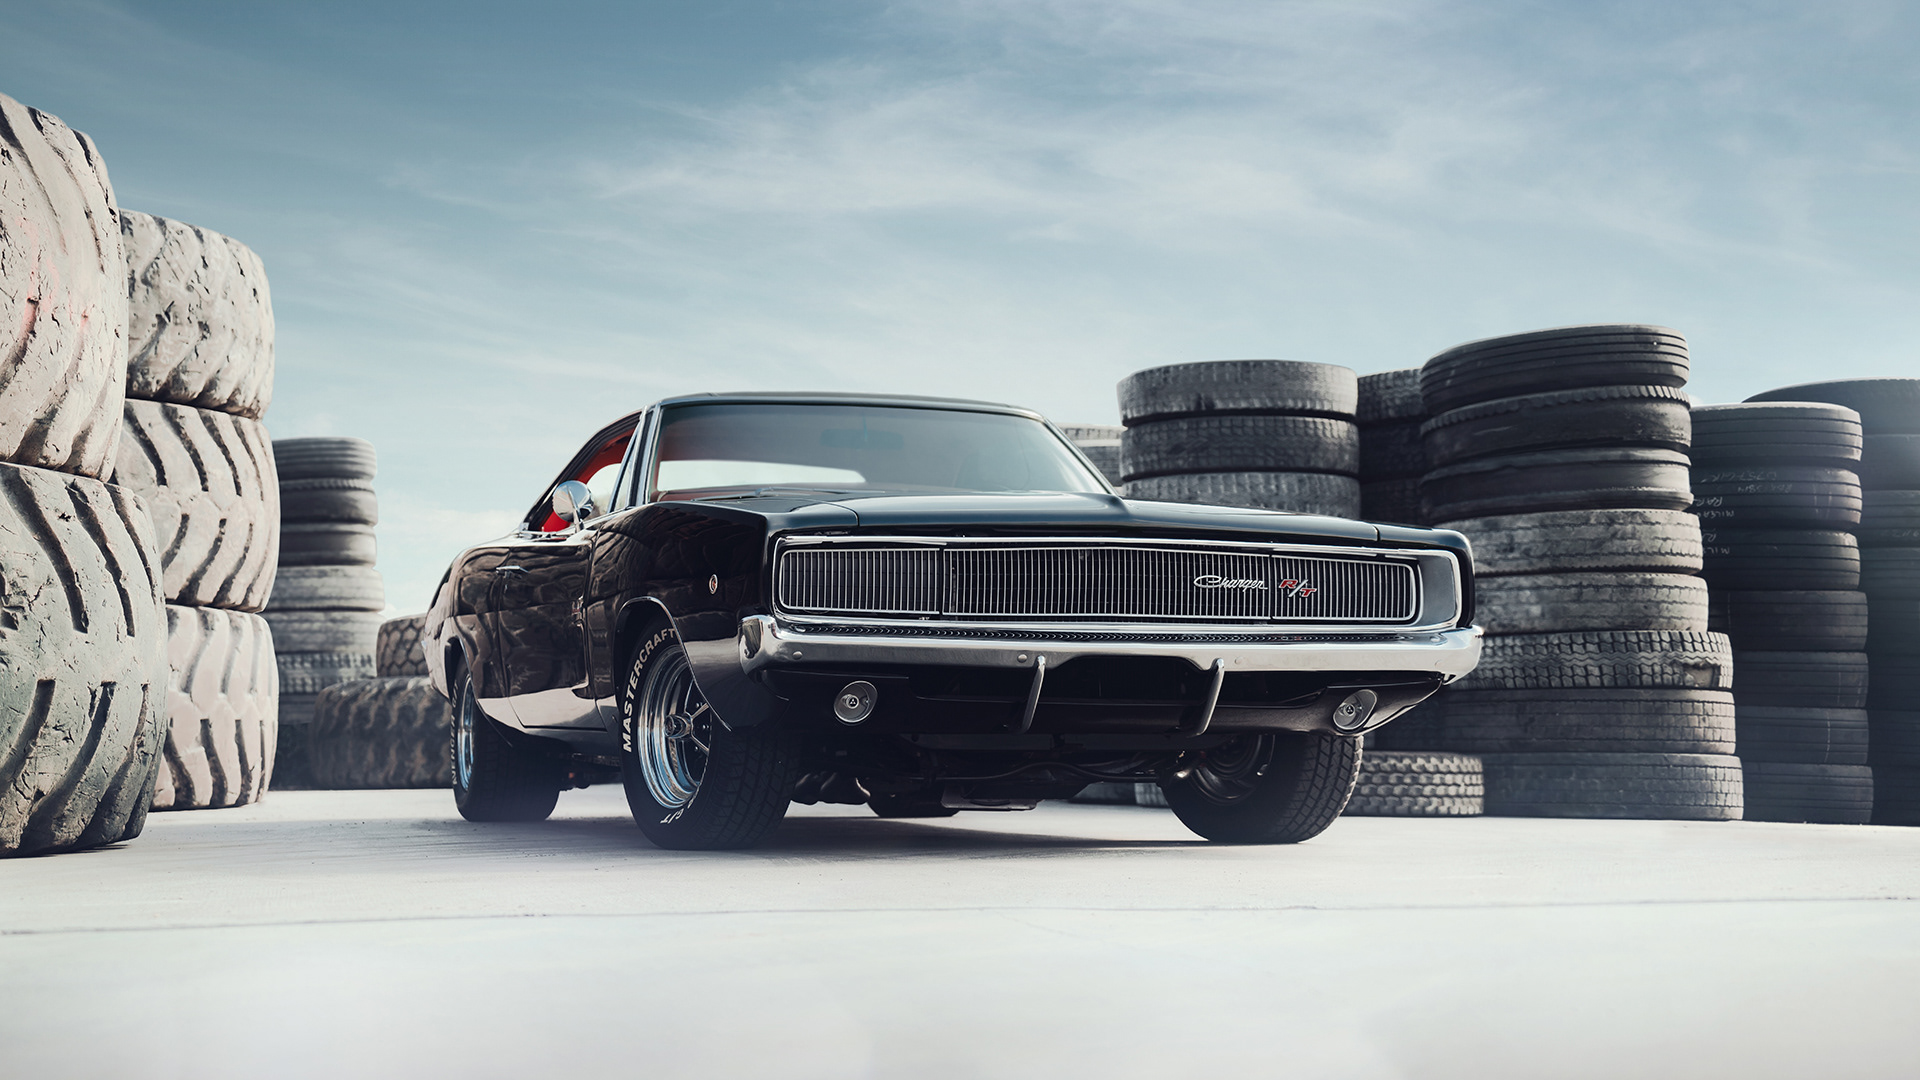 General 1920x1080 Charger RT Dodge Charger R/T 1968 car black cars tires sky Dodge pop-up headlights